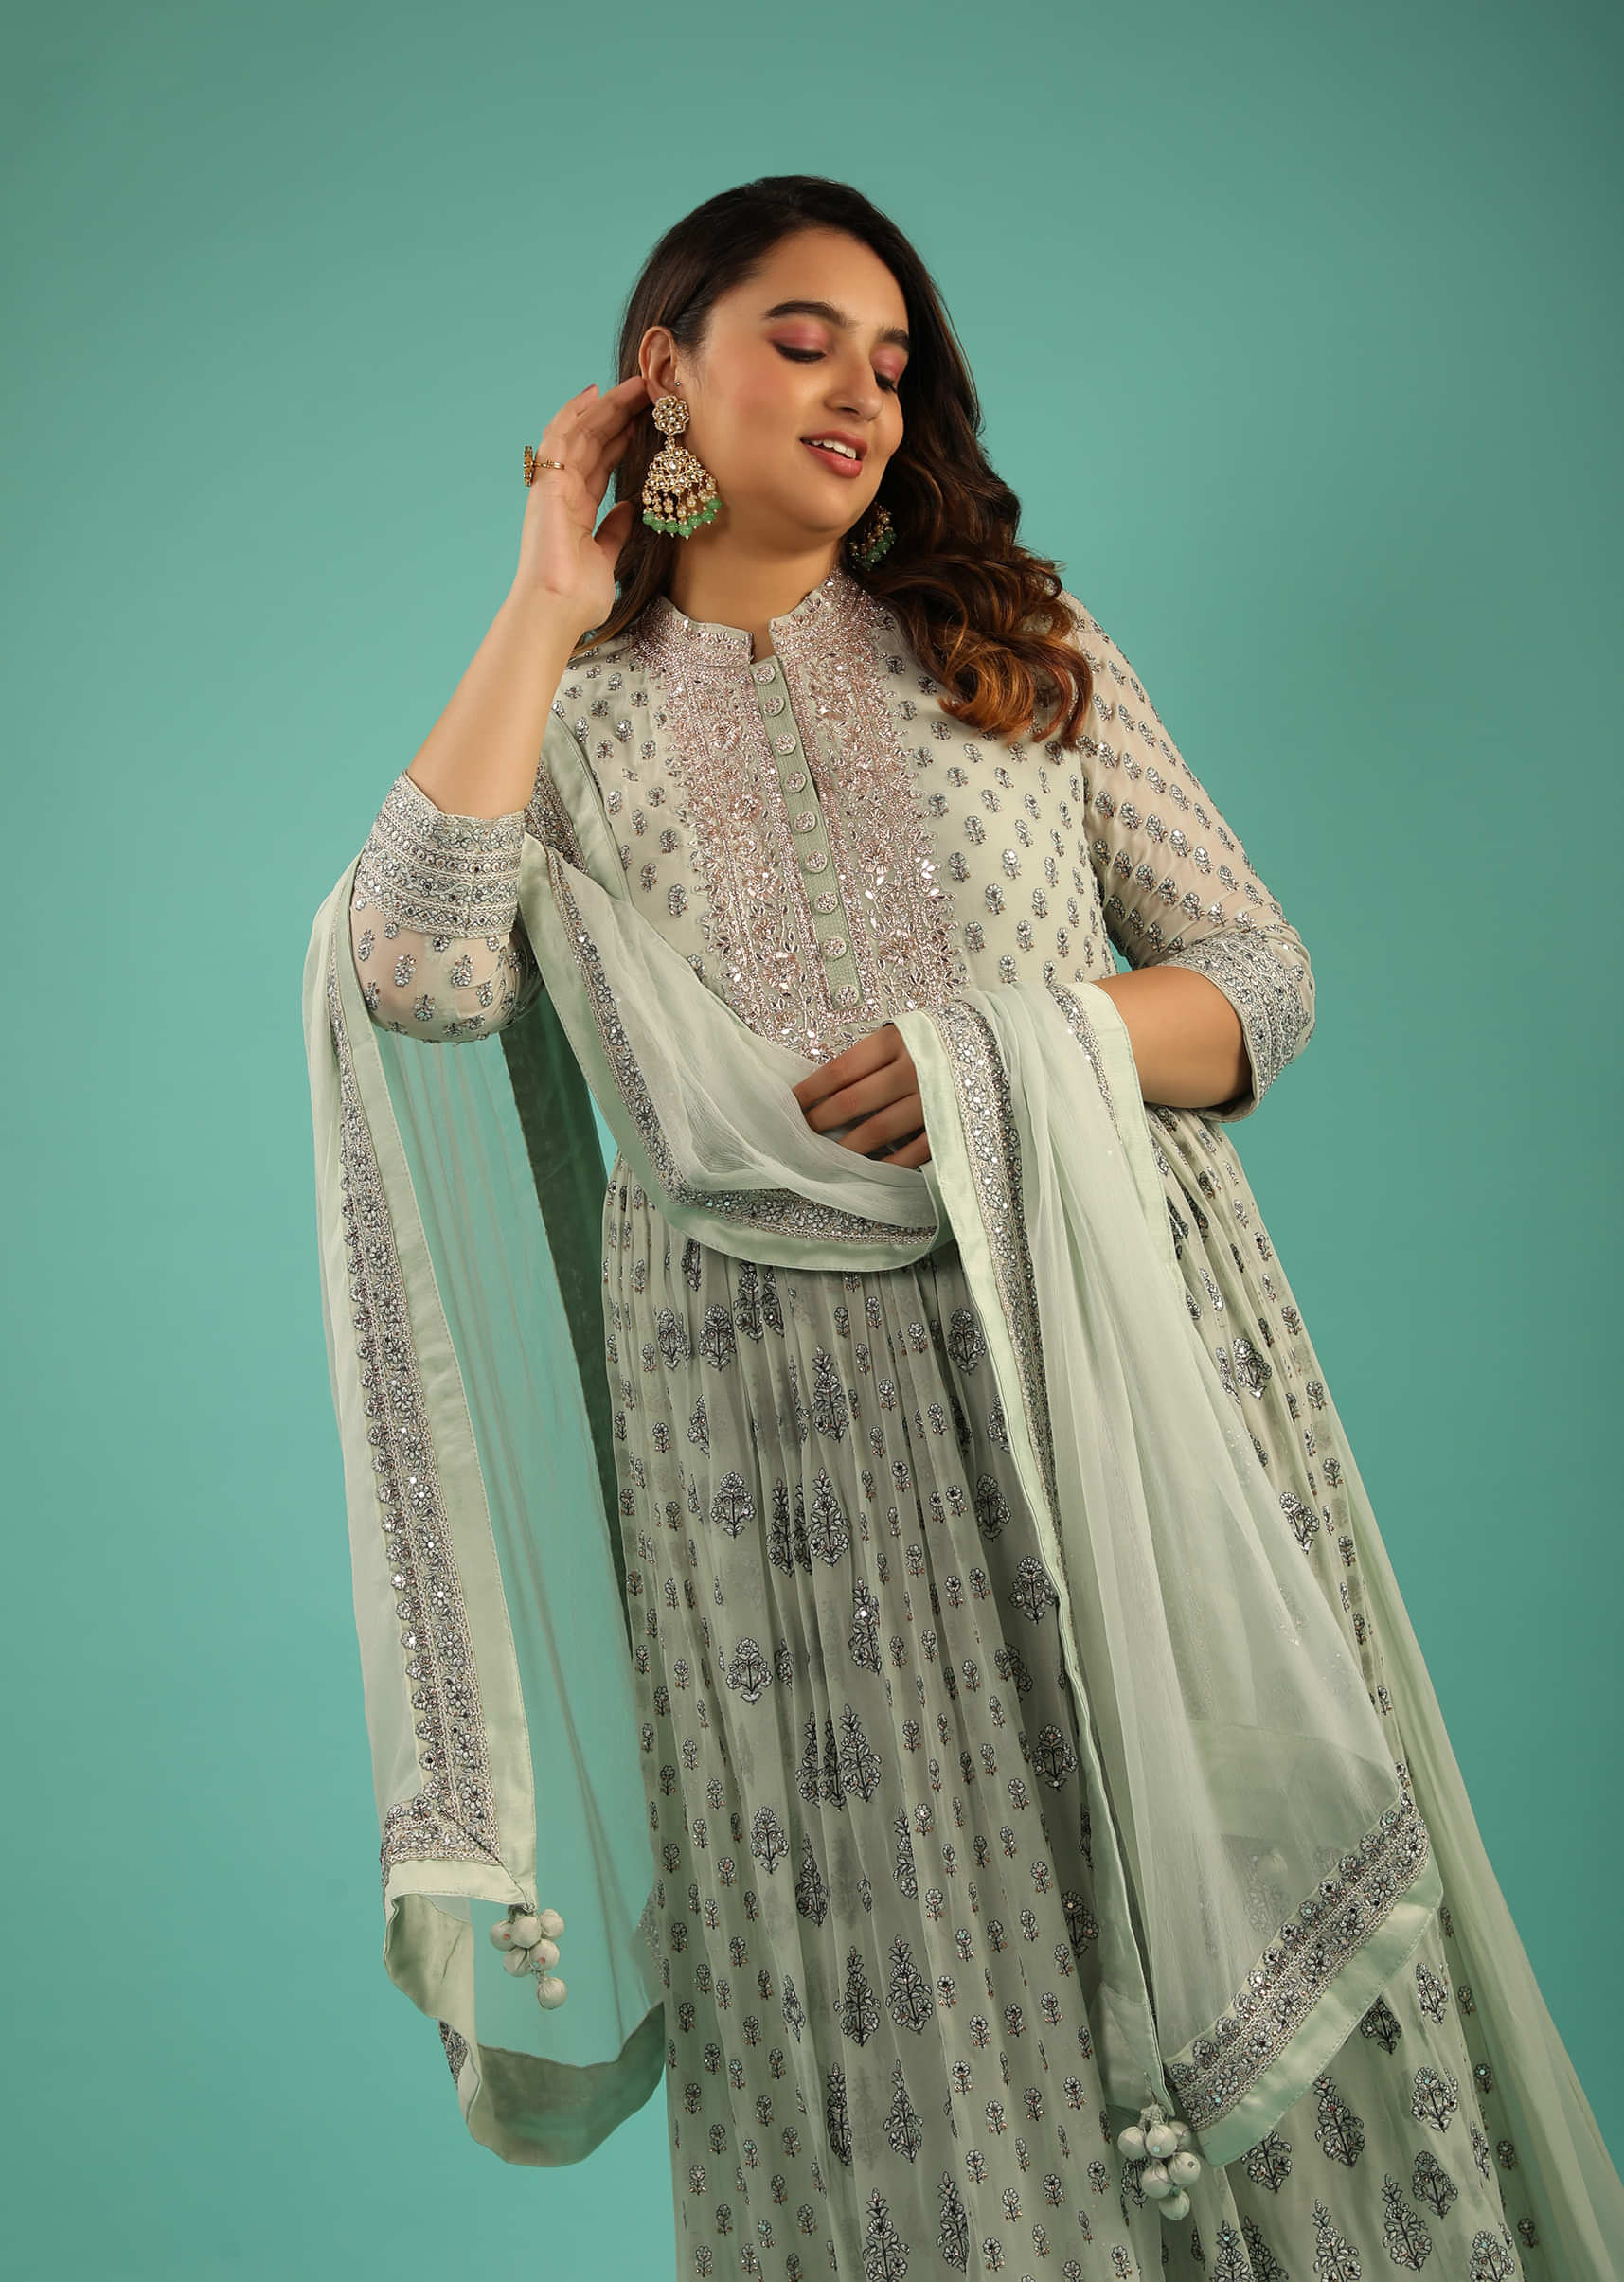 Dusty Green Anarkali Suit In Georgette With Resham And Mirror Embroidered Floral Buttis And Chiffon Dupatta  